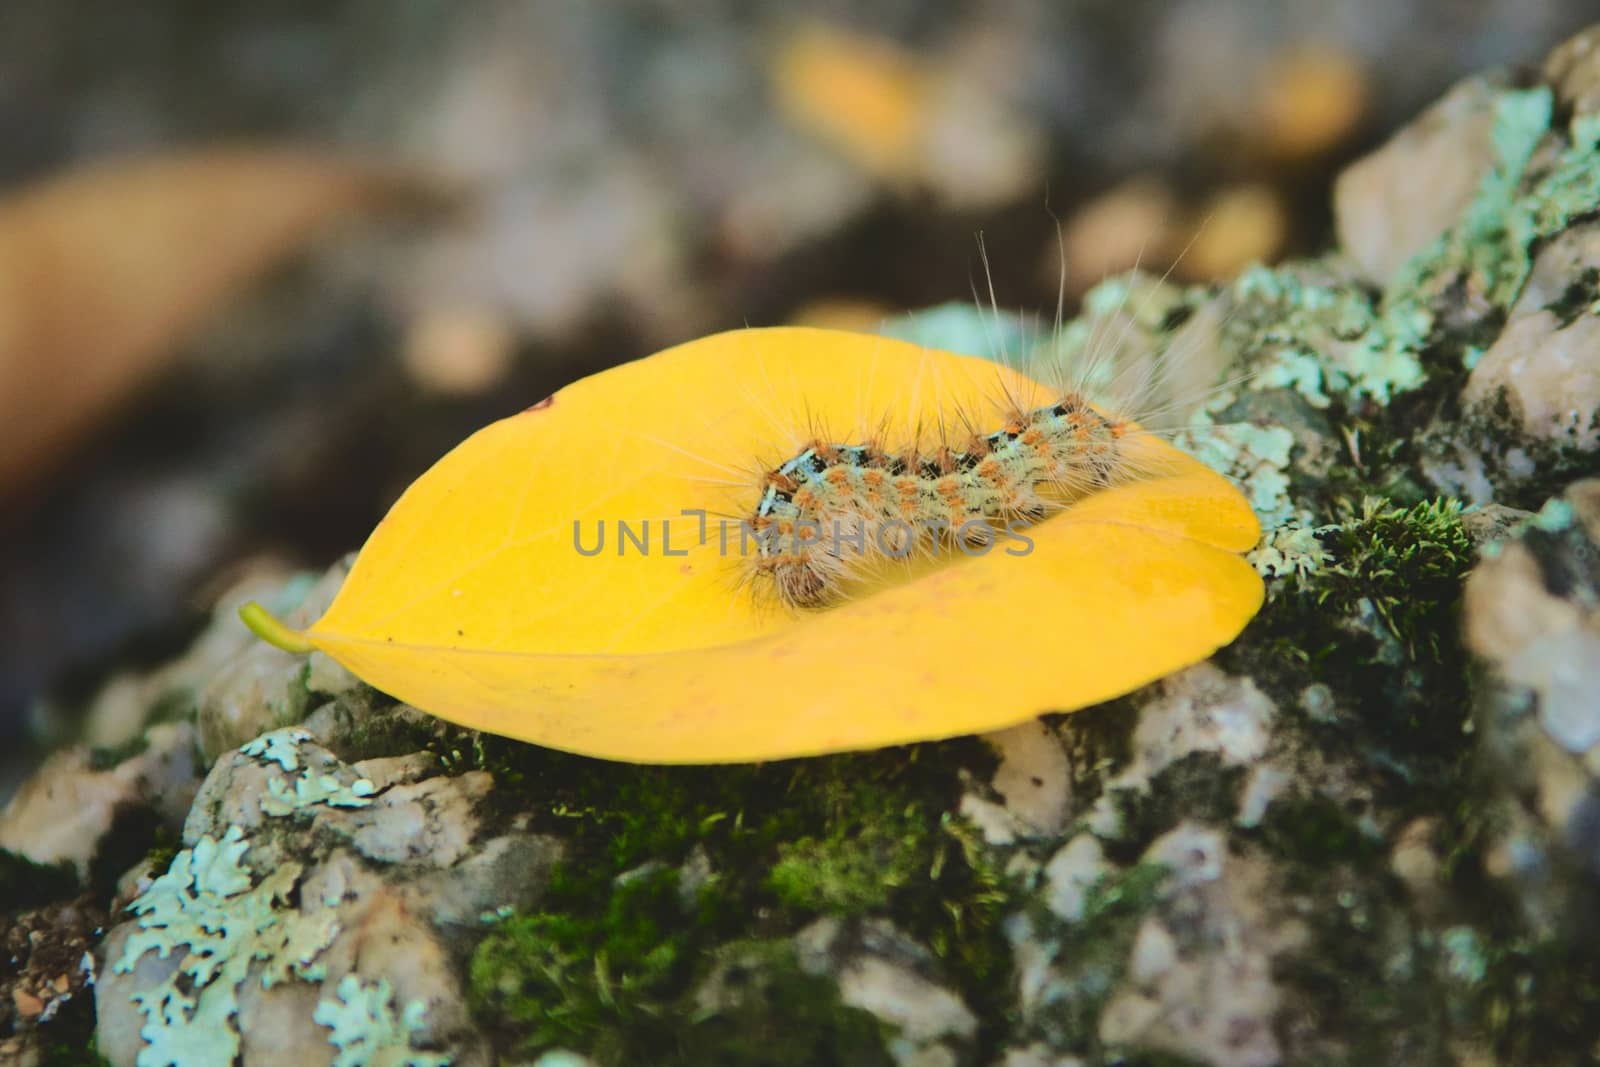 Caterpillar covered in urticating hairs as a defense mechanism, spotted in a forest in San Luis, Argentina.